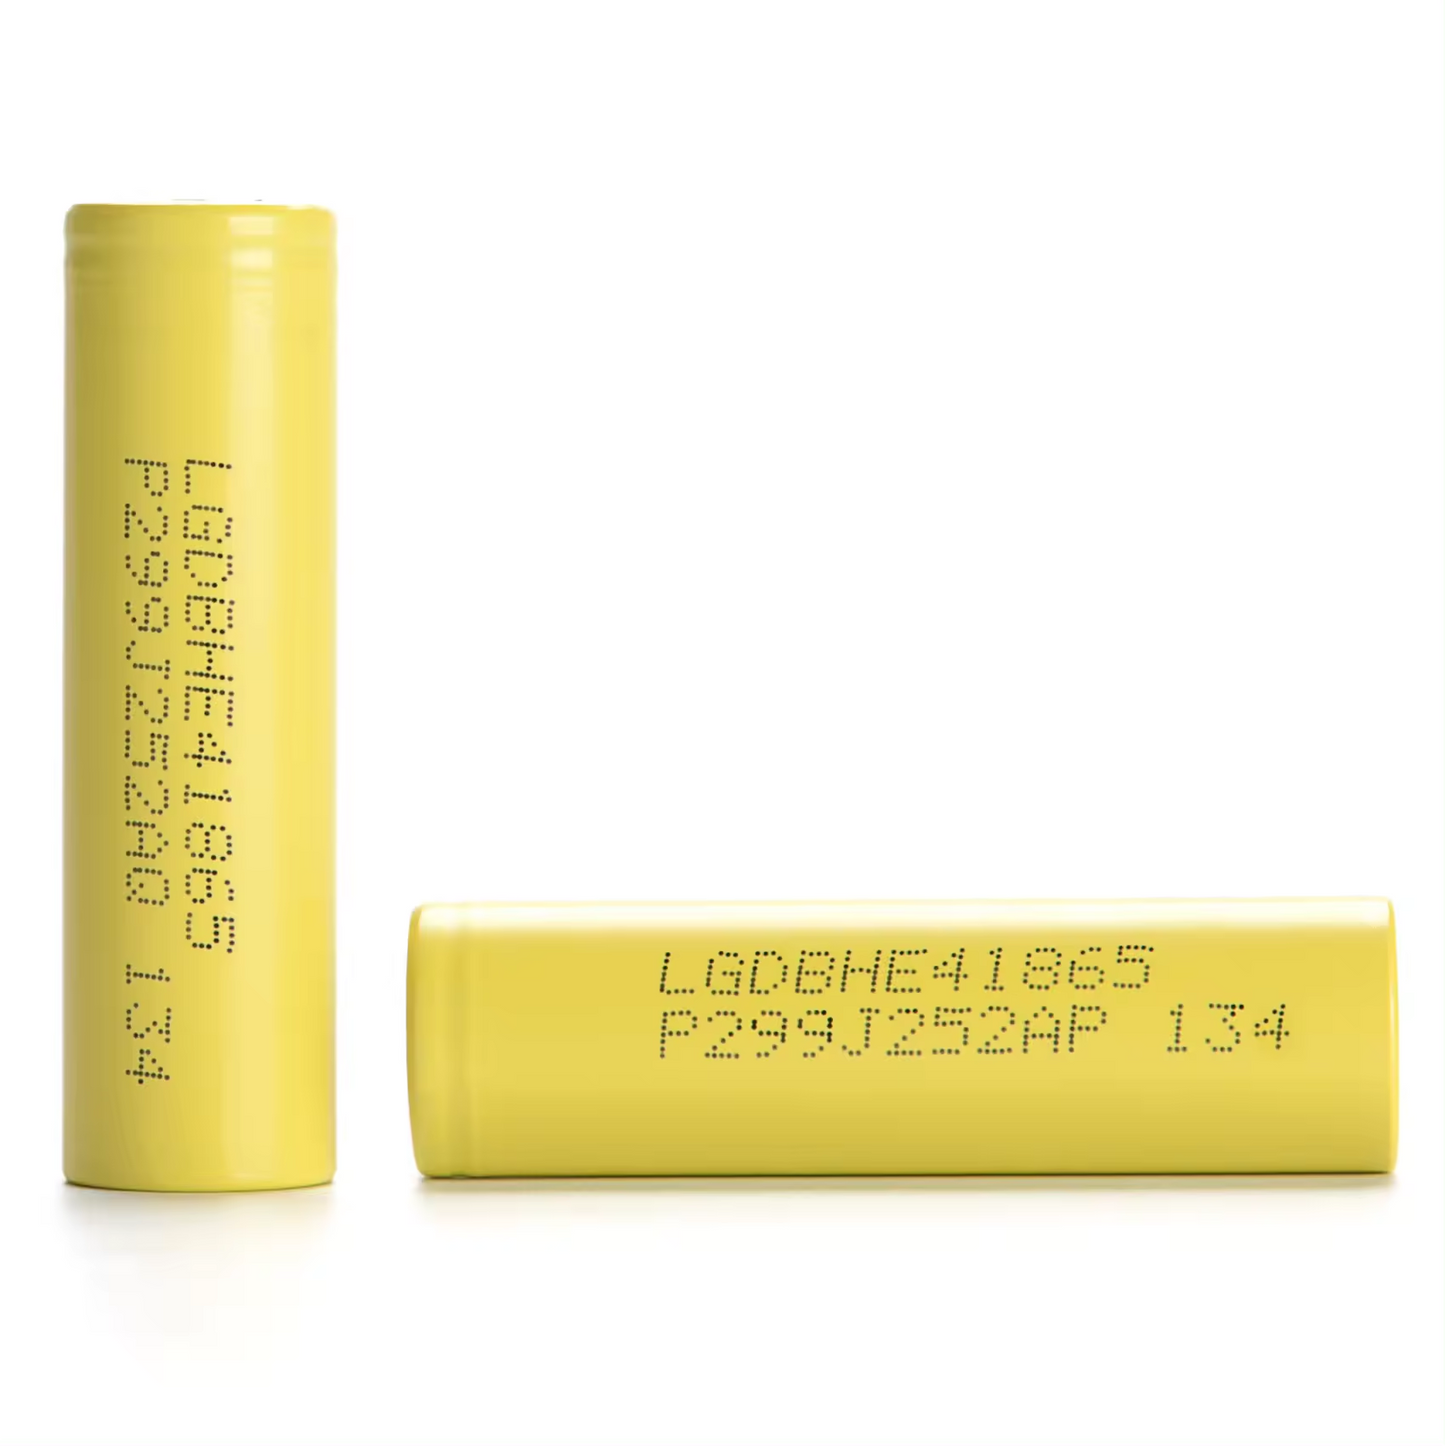 Wholesale lithium ion battery Rechargeable Battery High rate battery ICR18650-HE4 2500mAh 3.7V 20A 8C for LG